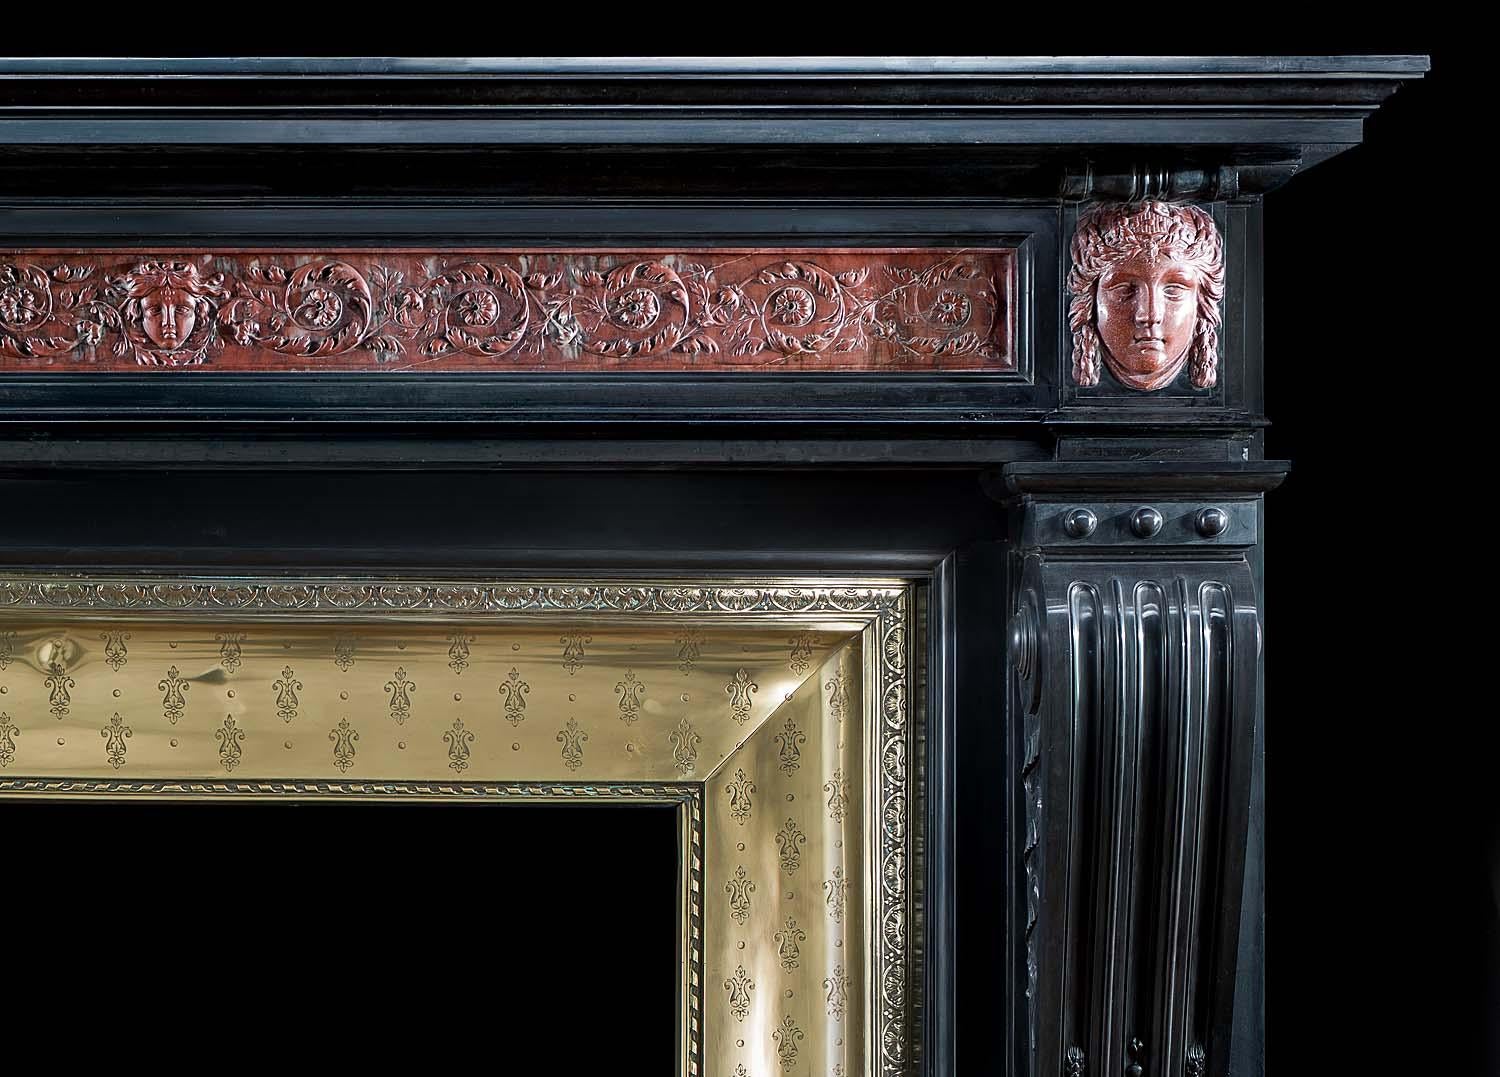 A large and imposing Louis XVI chimneypiece in Belgian black marble, with the frieze and endblocks carved in red Languedoc marble, together with its original brass insert. The stepped molded shelf rests above the wide ornately carved frieze centred